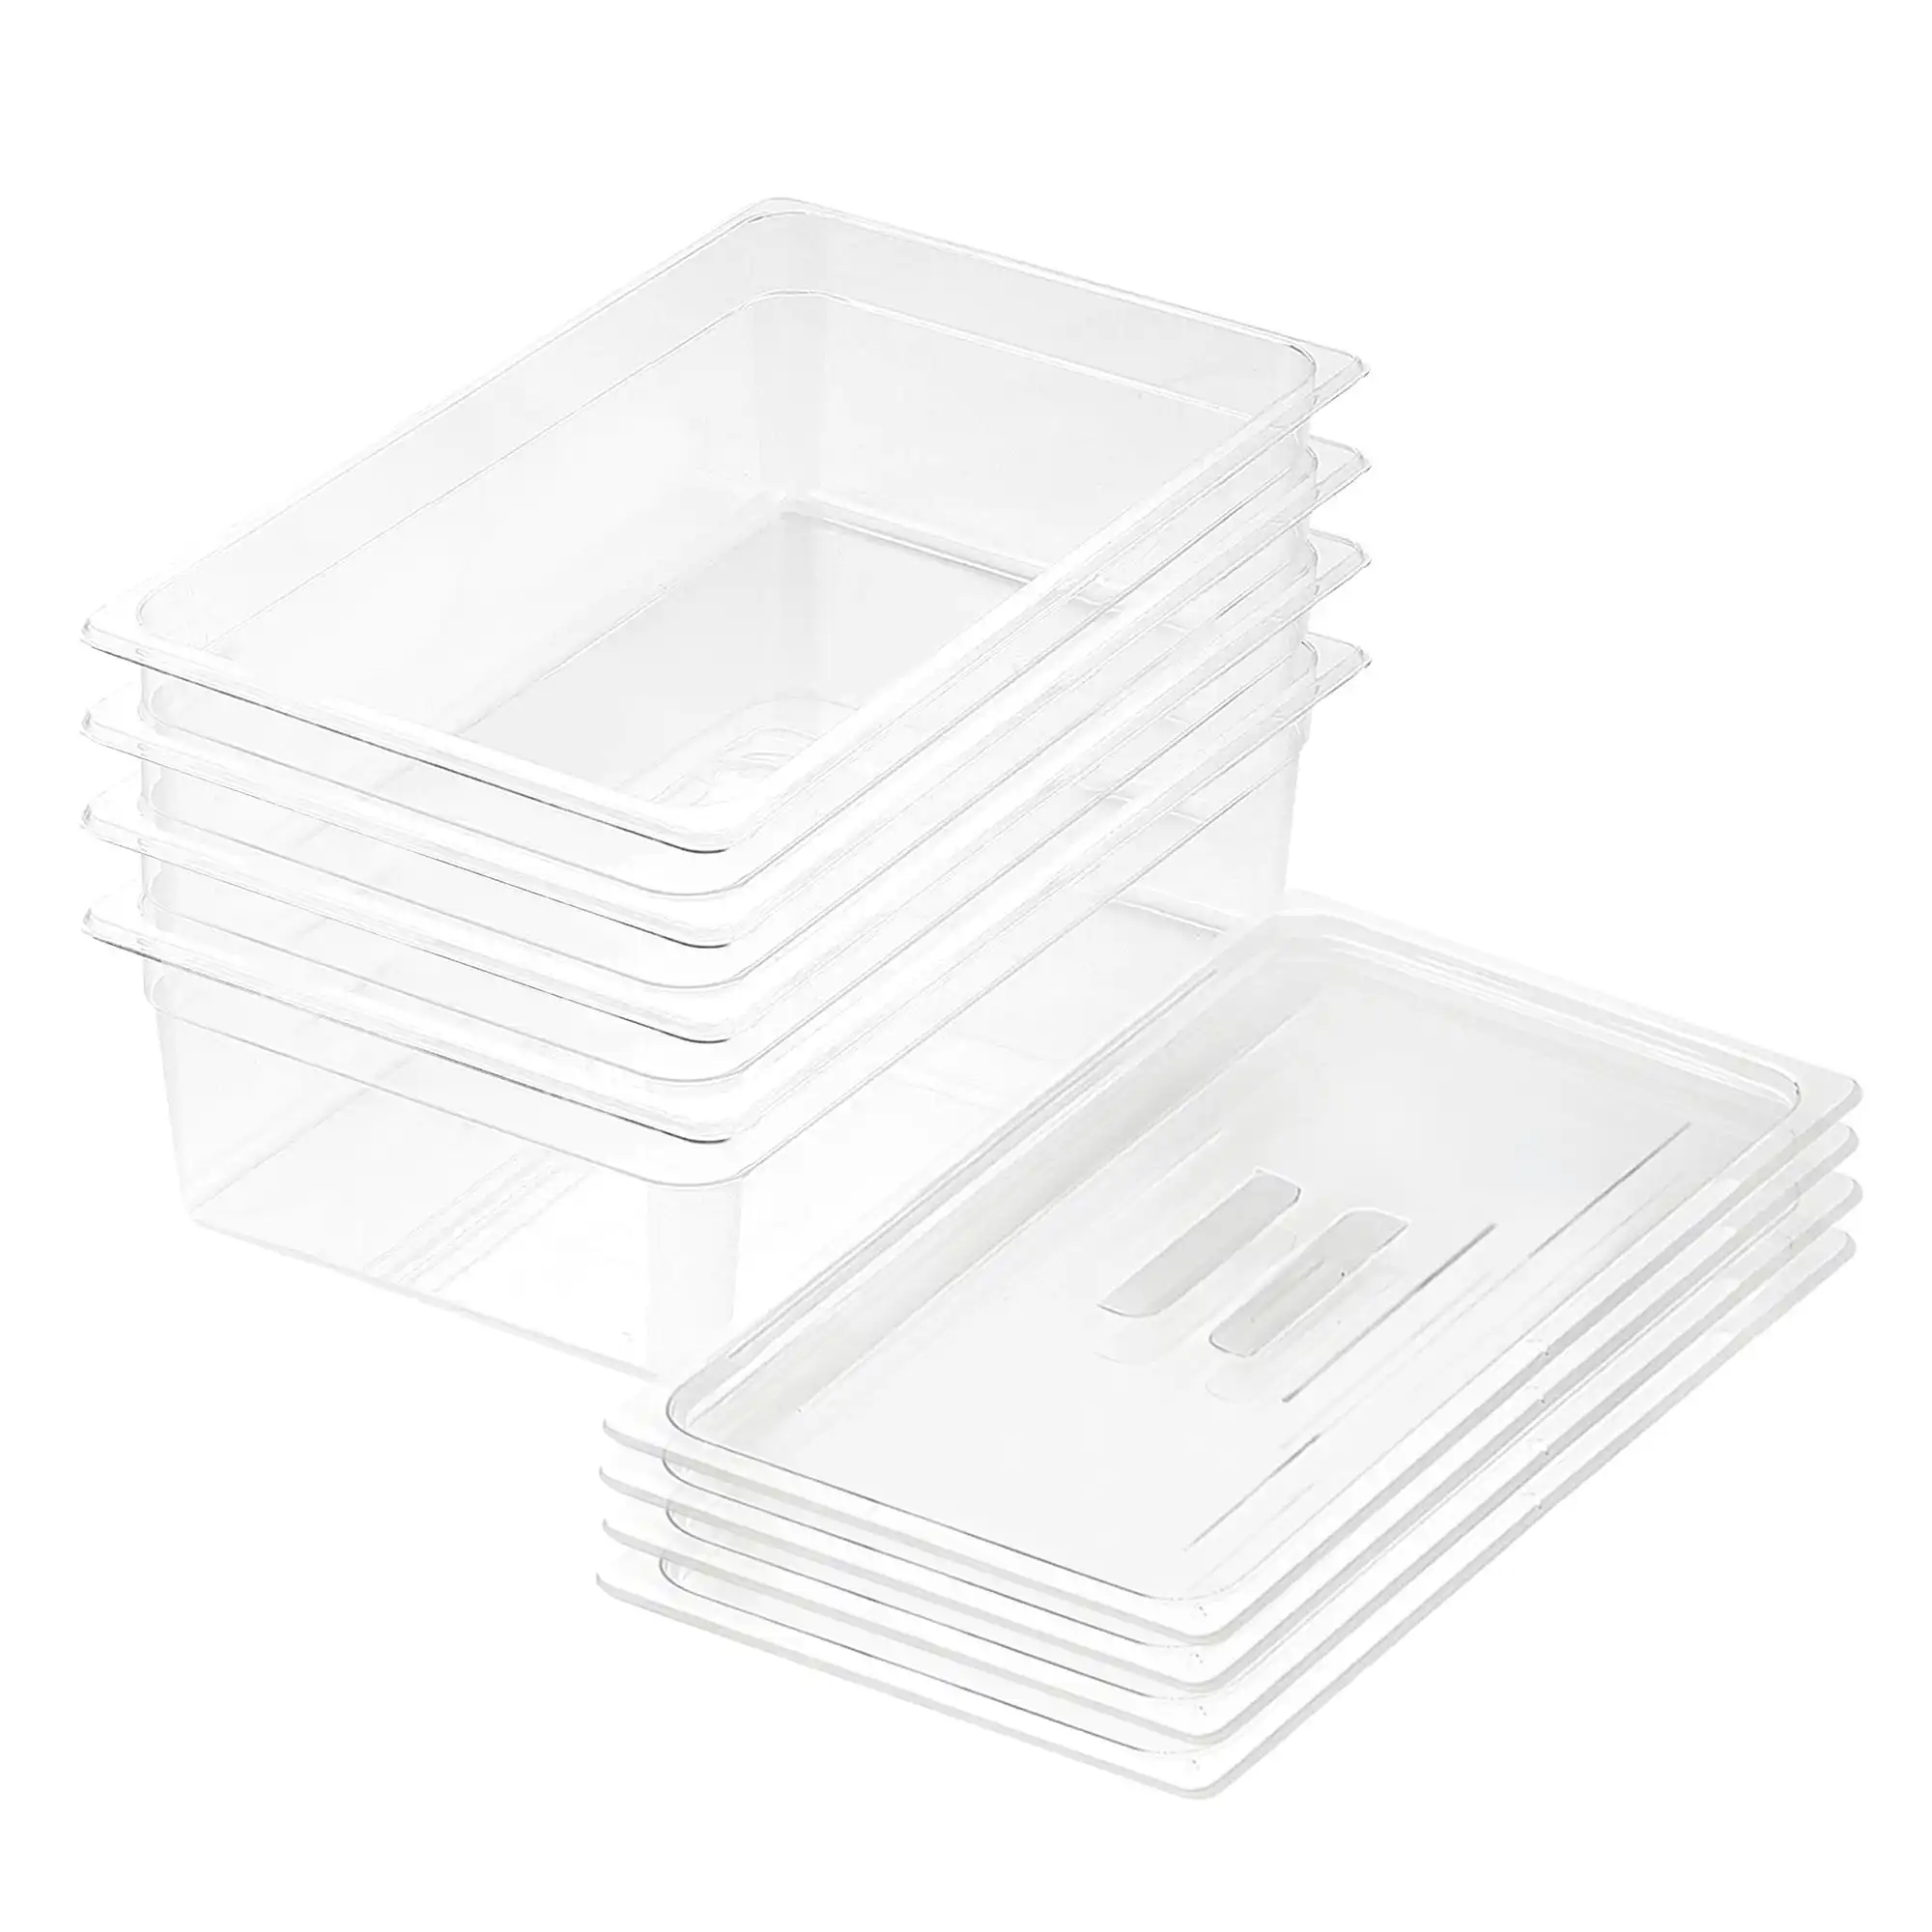 Soga 150mm Clear Gastronorm GN Pan 1/1 Food Tray Storage Bundle of 4 with Lid